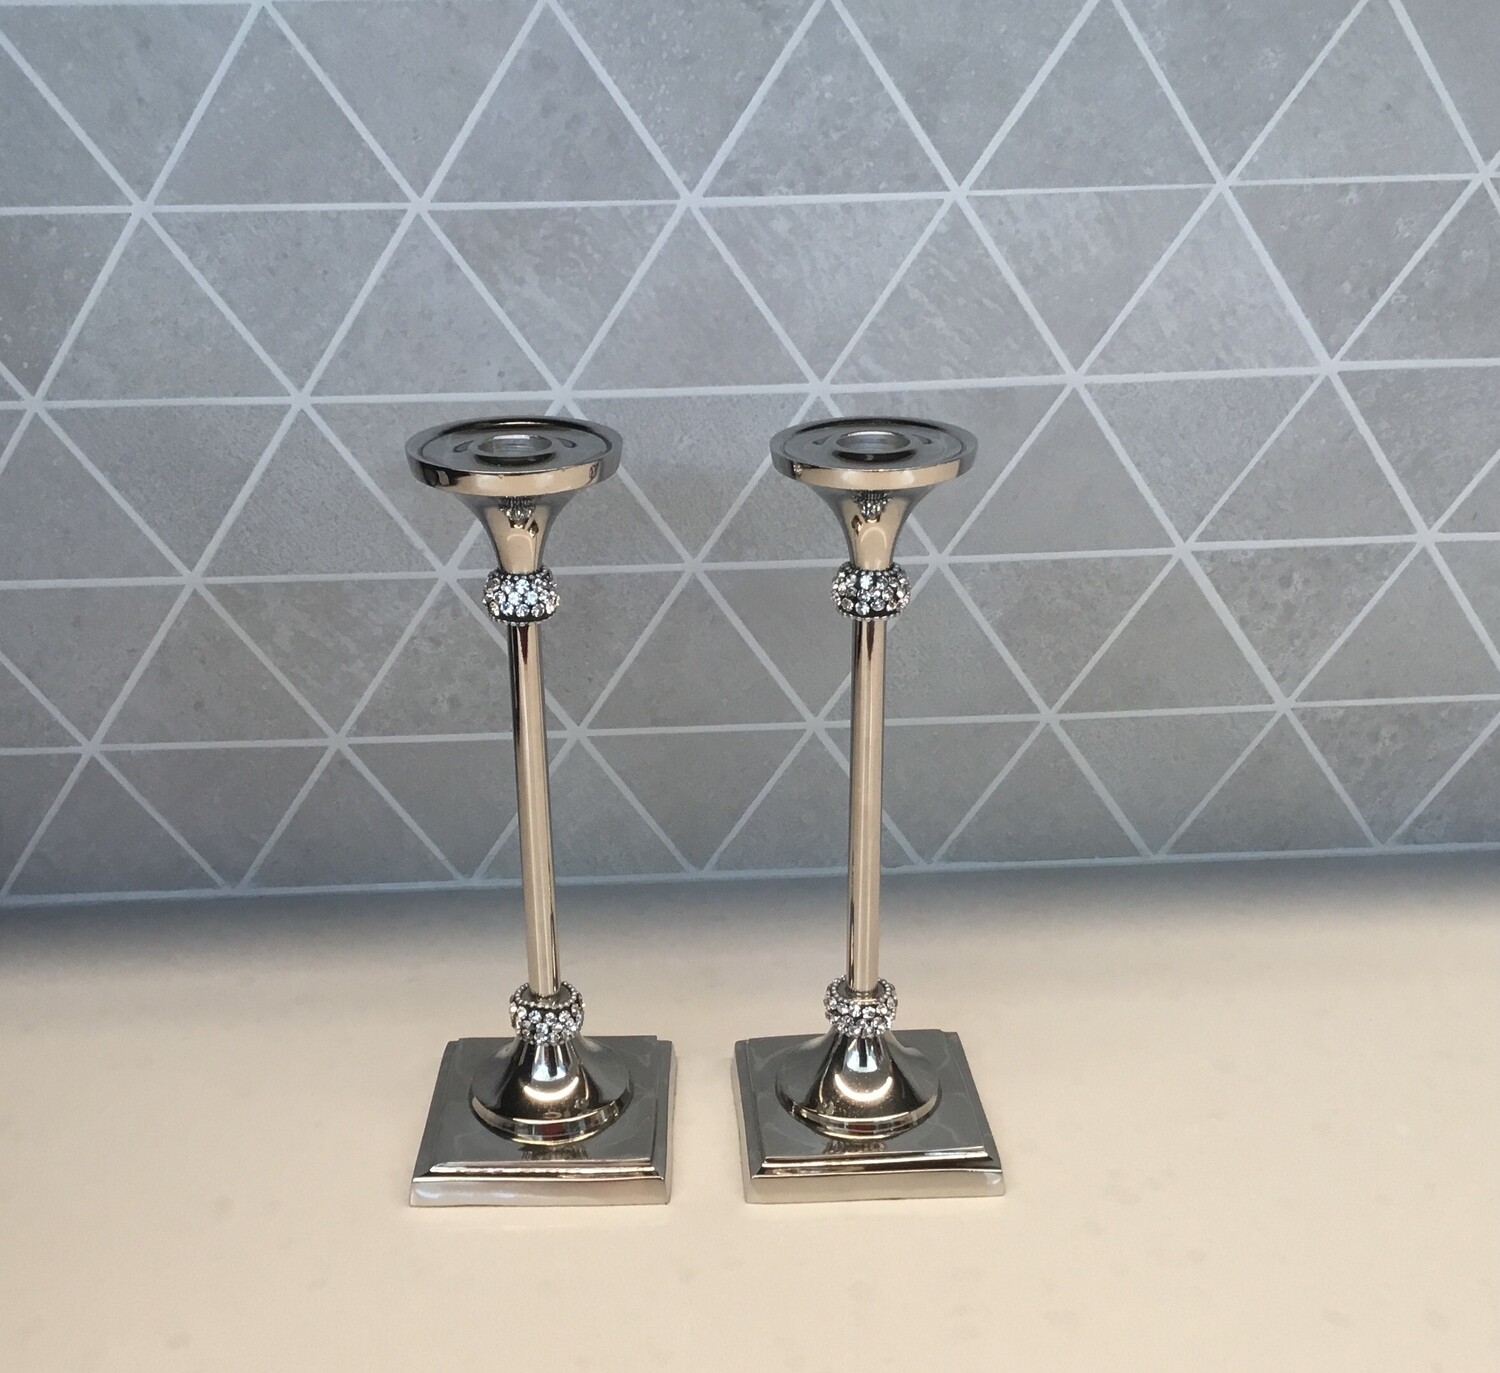 Stainless Steel Candlesticks with Chatons(diamond like)